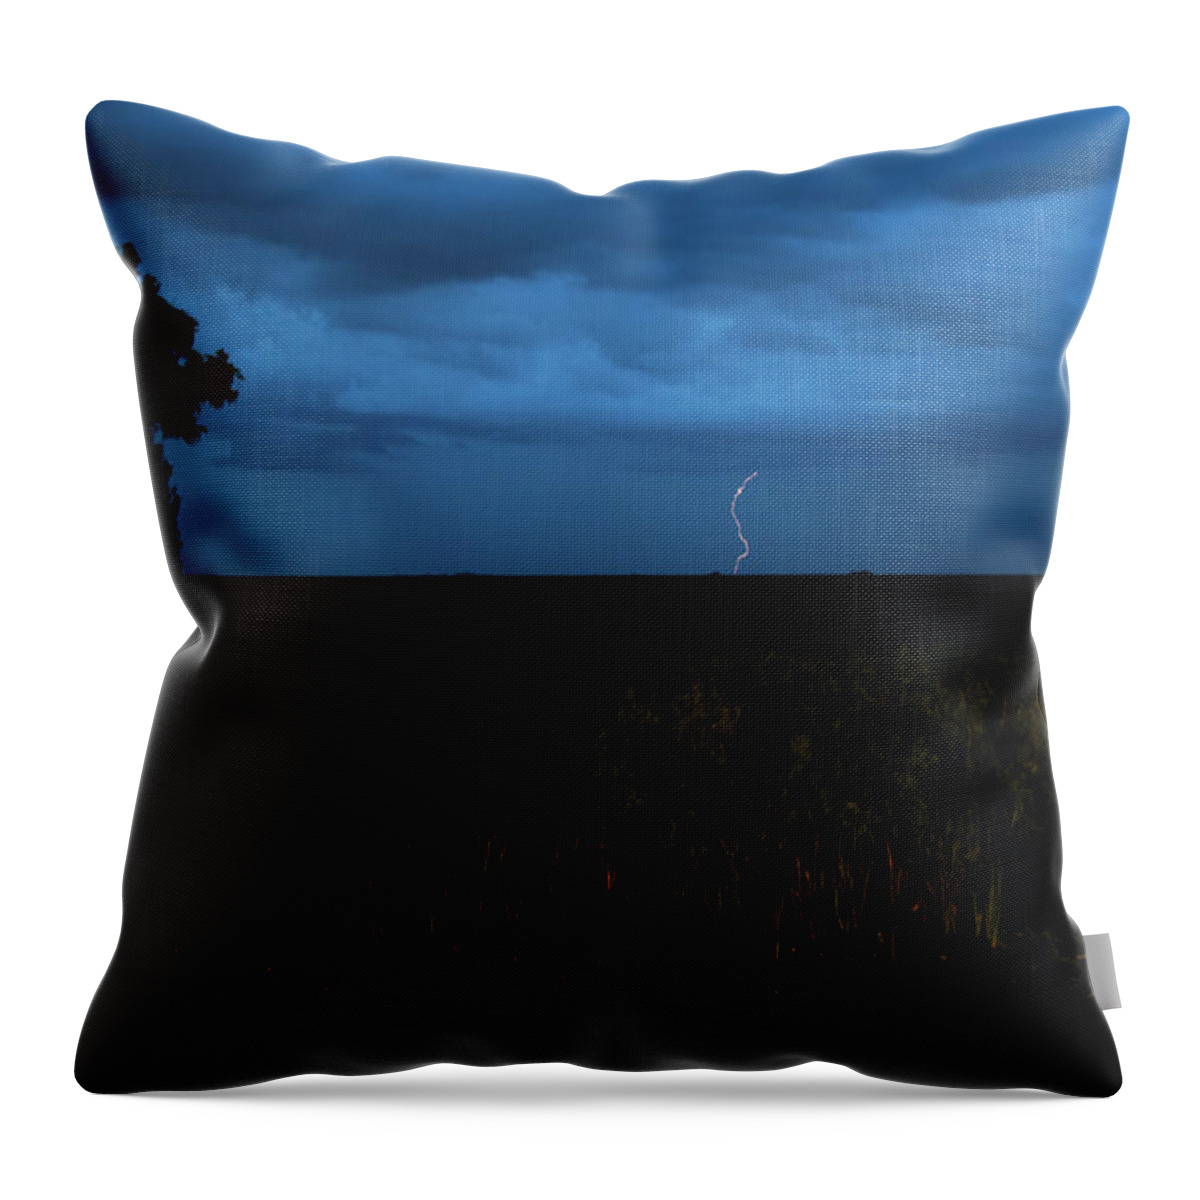 Delray Throw Pillow featuring the photograph Alligator Alley Lightning 3 by Ken Figurski